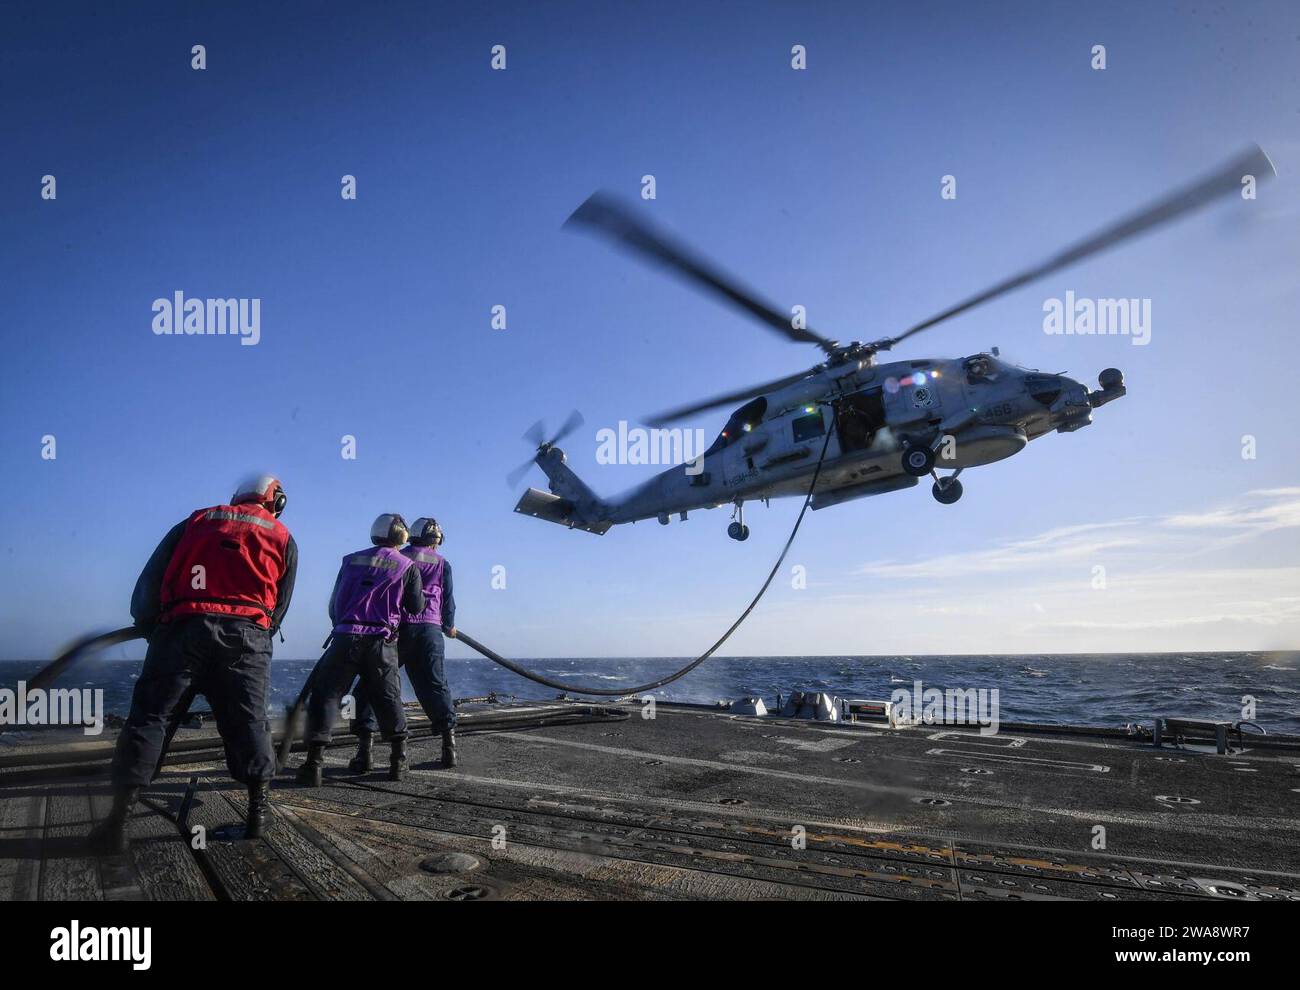 US military forces. 171025UY653-508  ATLANTIC OCEAN (Oct. 25, 2017) Sailors refuel an MH-60R Sea Hawk helicopter, attached to the 'Grandmasters' of Helicopter Maritime Strike Squadron (HSM) 46, on the flight deck of the Arleigh Burke-class guided-missile destroyer USS Oscar Austin (DDG 79) Oct. 25, 2017. Oscar Austin is on a routine deployment supporting U.S. national security interests in Europe, and increasing theater security cooperation and forward naval presence in the U.S. 6th Fleet area of operations. (U.S. Navy photo by Mass Communication Specialist 2nd Class Ryan Utah Kledzik/Released Stock Photo